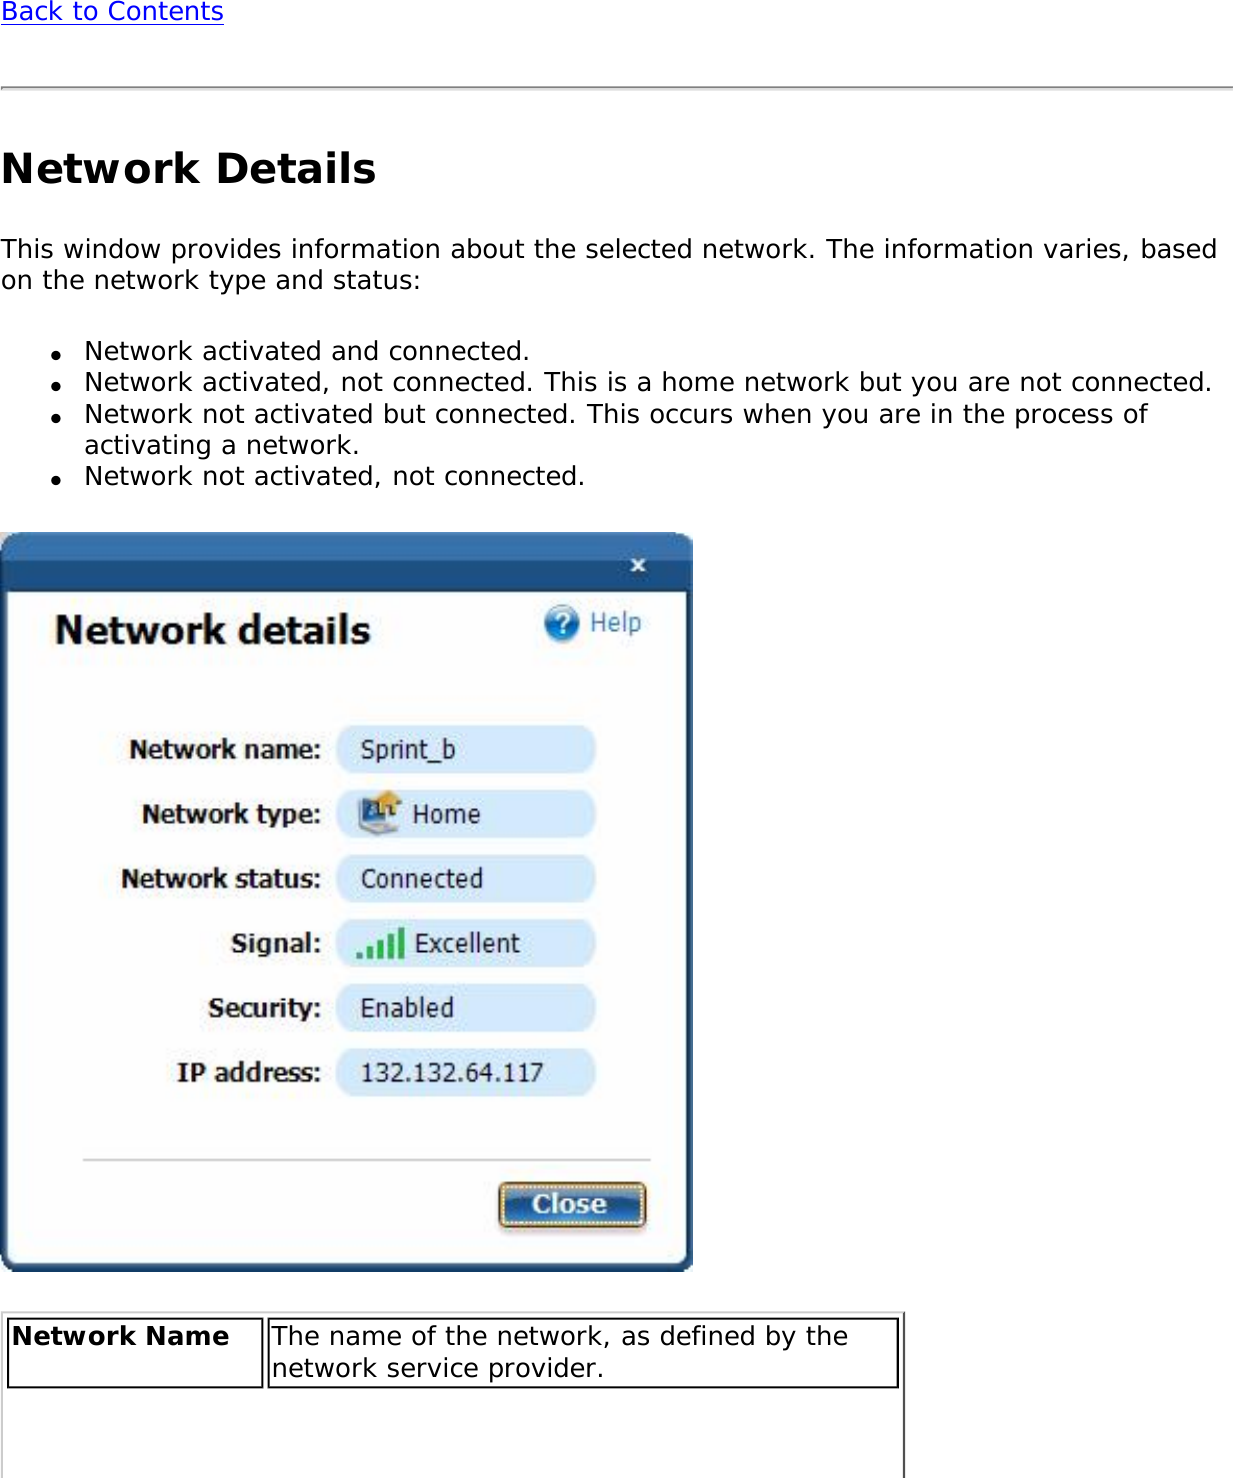 Back to ContentsNetwork DetailsThis window provides information about the selected network. The information varies, based on the network type and status:●     Network activated and connected.●     Network activated, not connected. This is a home network but you are not connected.●     Network not activated but connected. This occurs when you are in the process of activating a network. ●     Network not activated, not connected. Network Name  The name of the network, as defined by the network service provider.